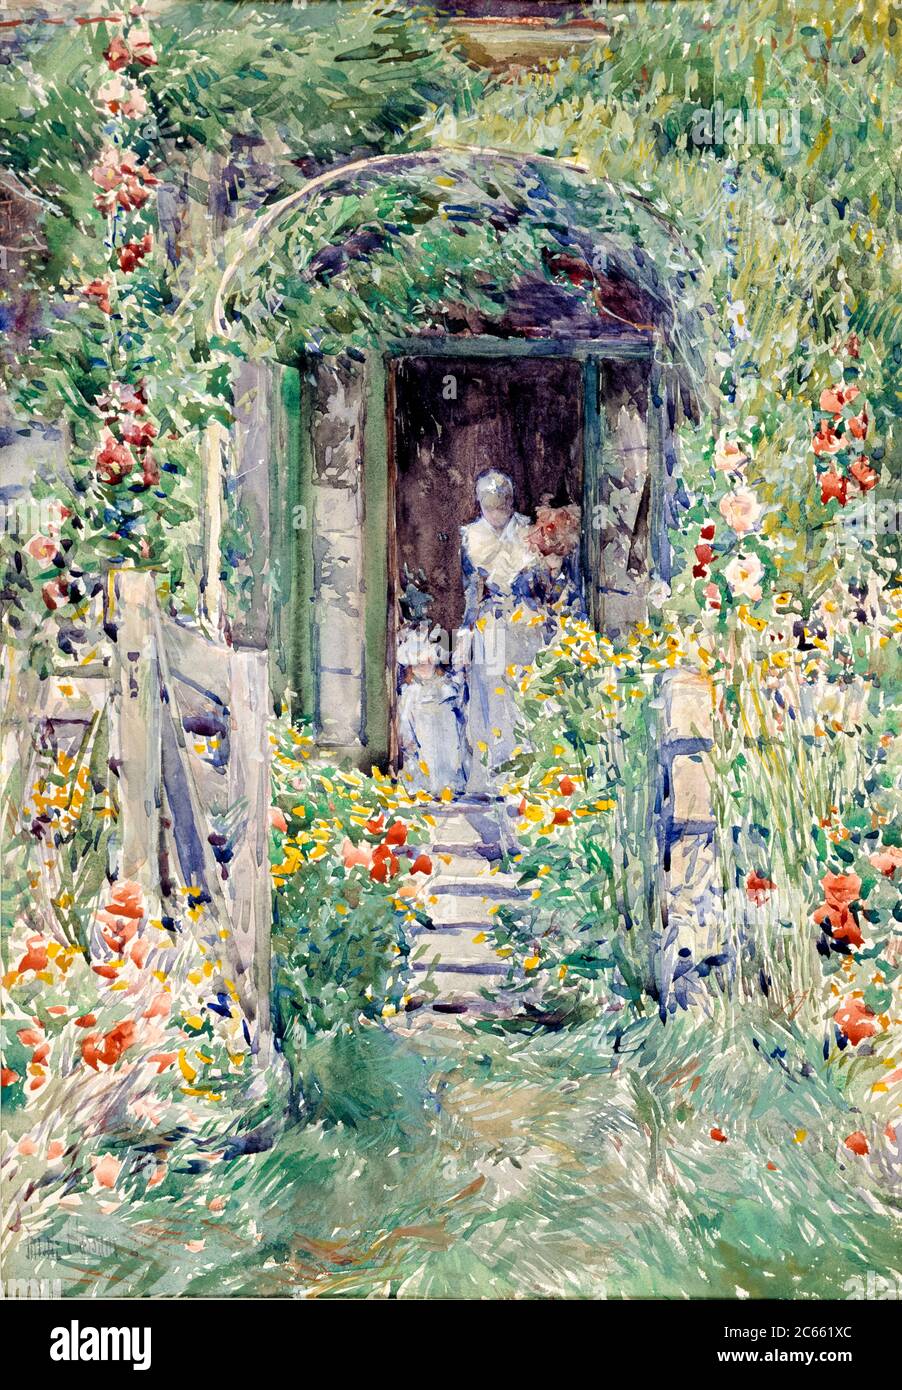 Childe Hassam, The Garden in Its Glory, painting, 1892 Stock Photo